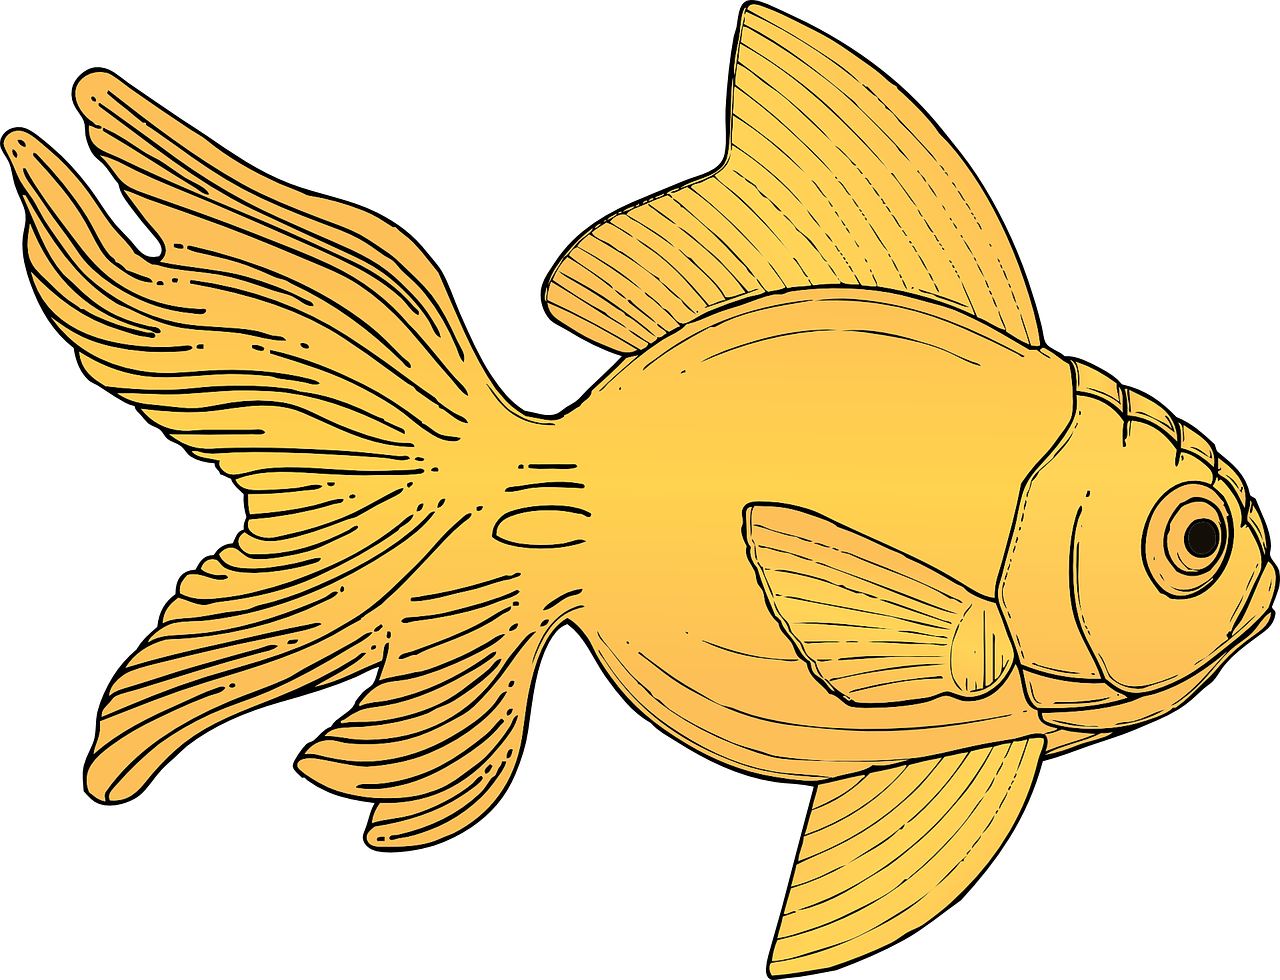 A Gold Fish With Black Background